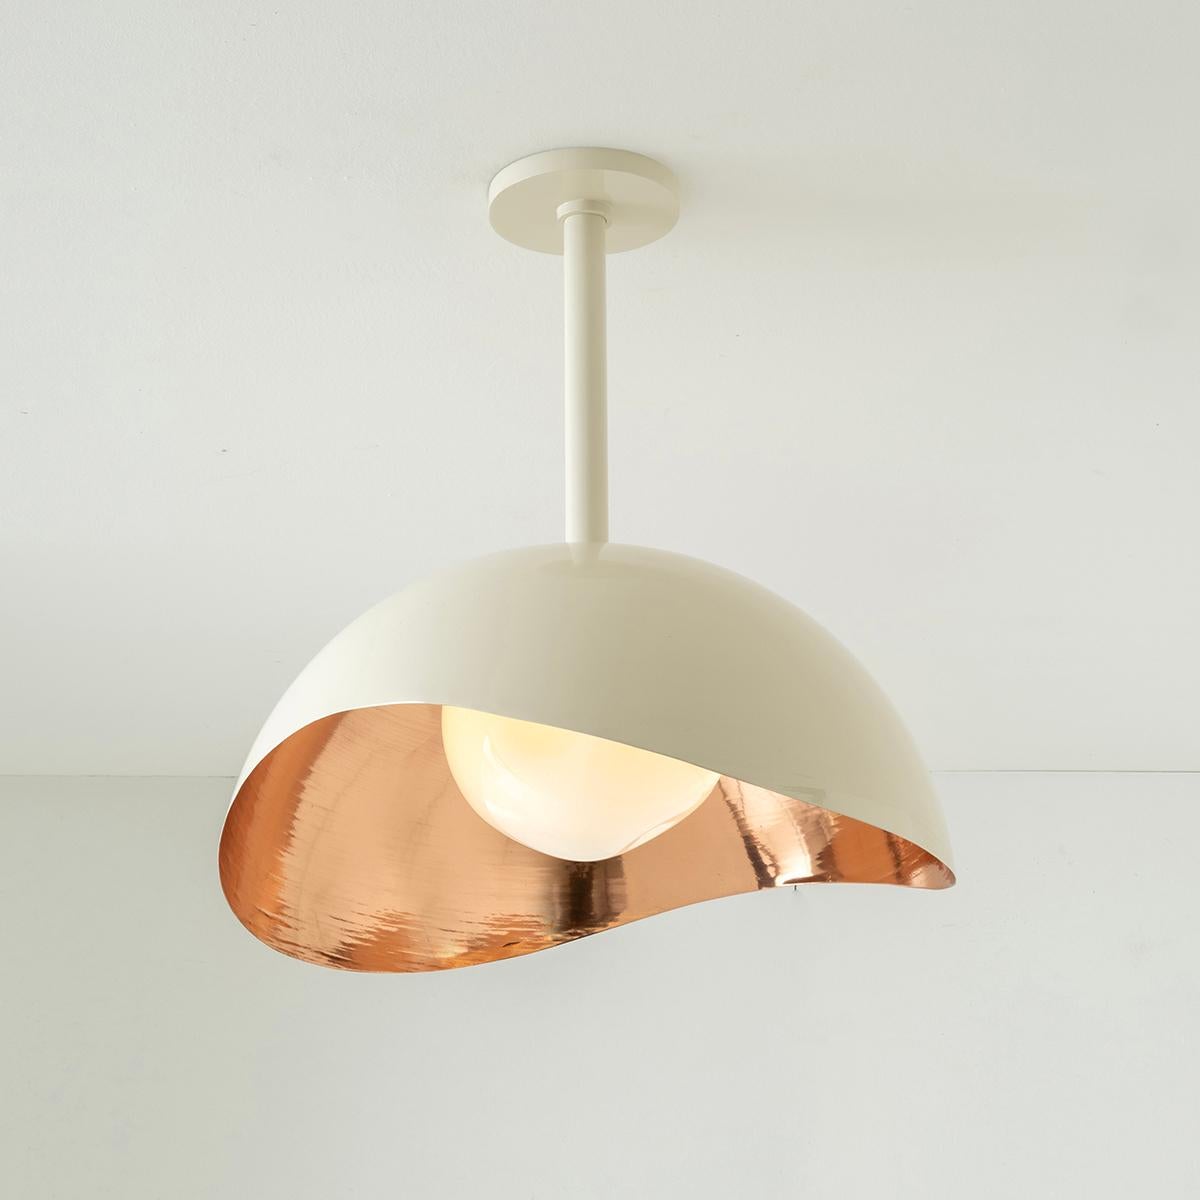 Perla Grande Ceiling Light - Polished Brass Interior and Satin Nickel Exterior In New Condition For Sale In New York, NY